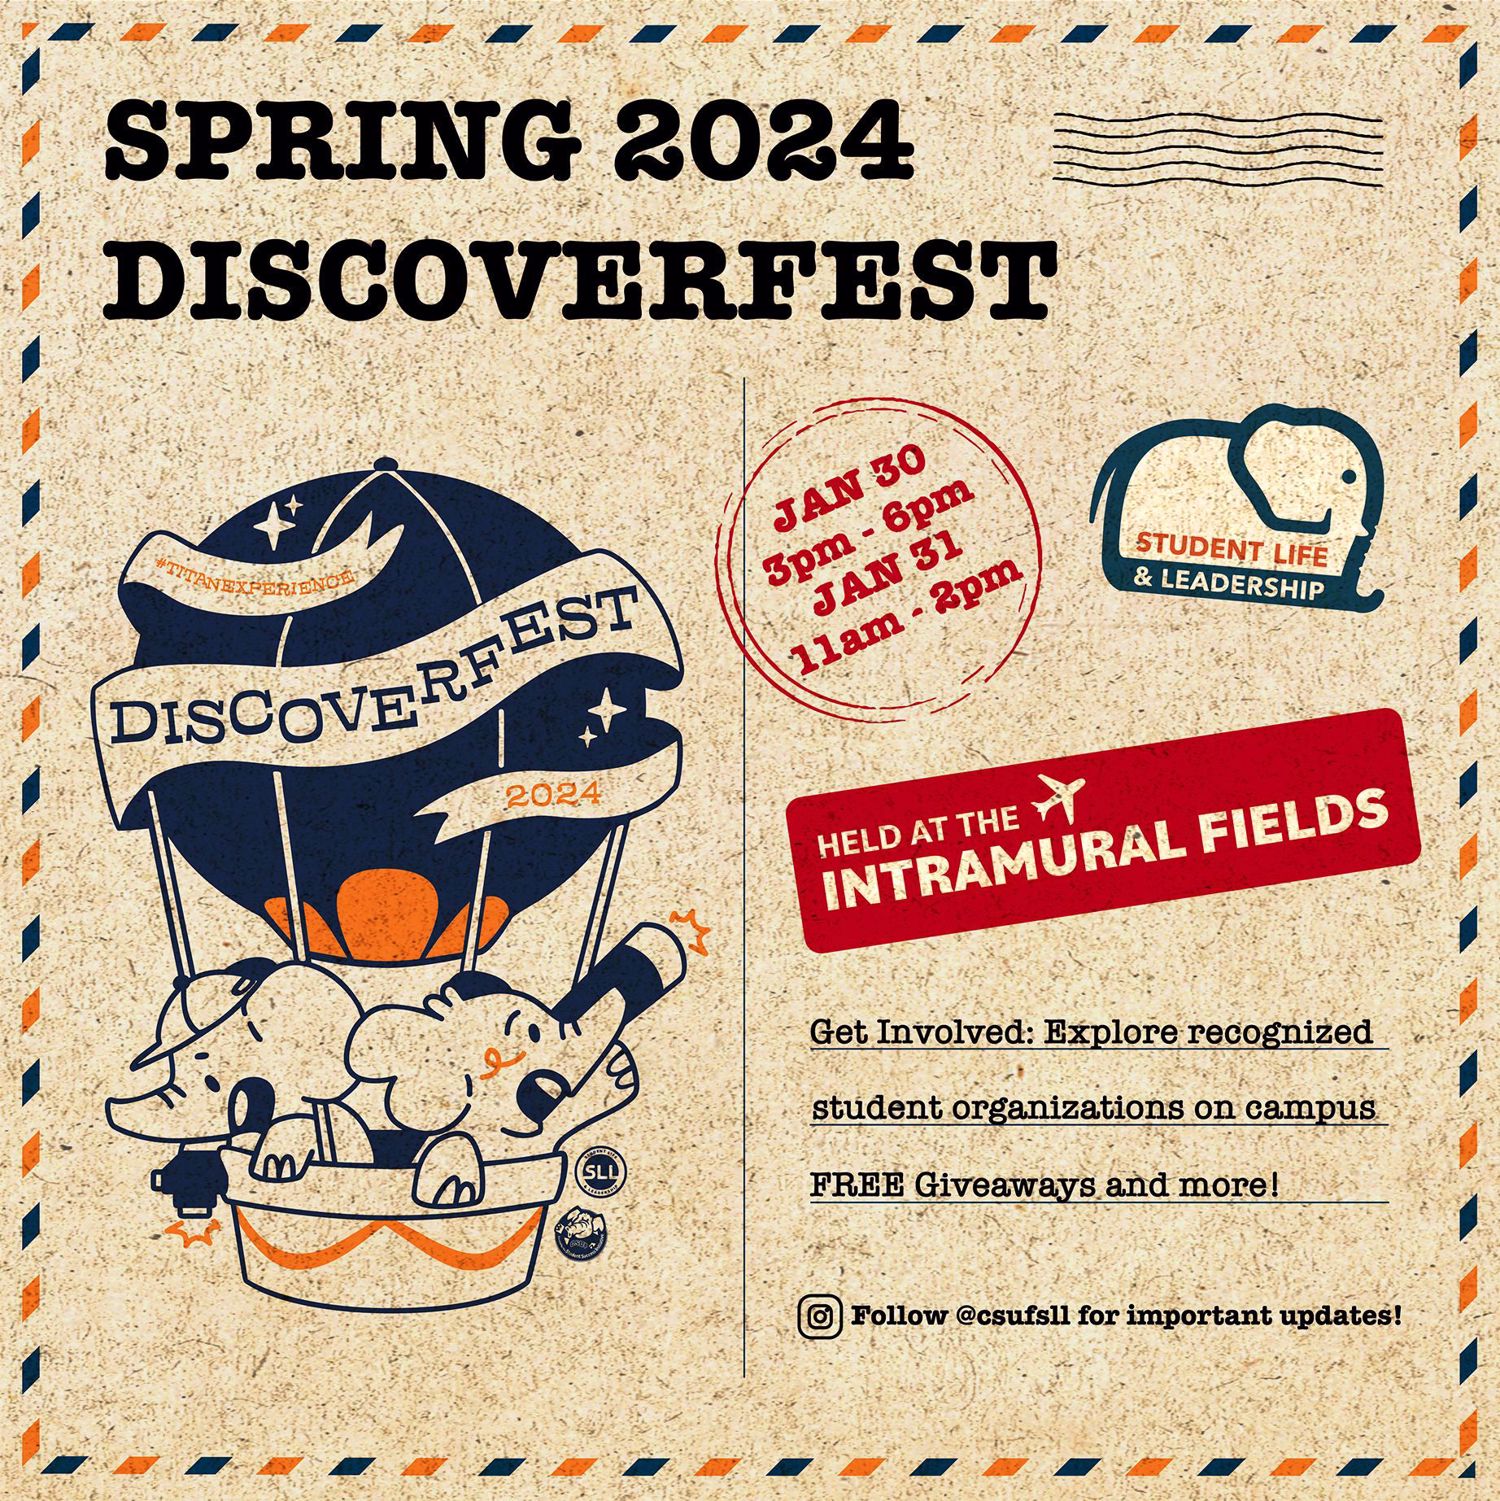 Spring 2024 Discoverfest graphic. This event is on January 30th from 3 PM to 6 PM and January 31st from 11 AM to 2 PM on the Intramural Fields. Get involed and explore recognized student organizations on campus. There will be free giveaways and more!